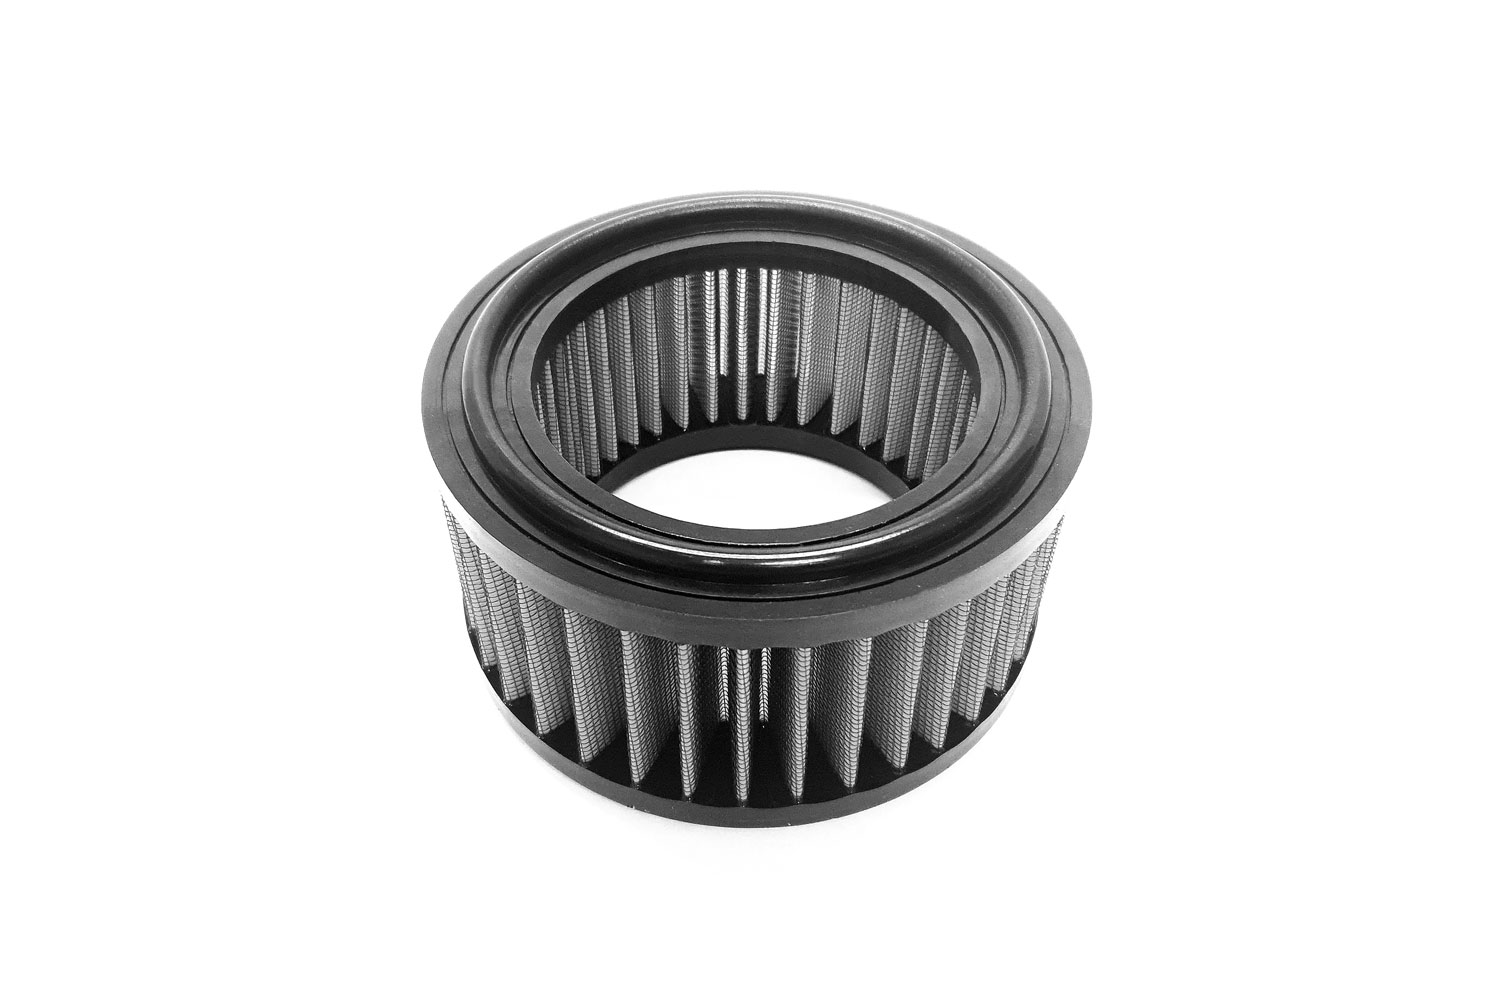 Buy Sprint Filter T14 Royal Enfield Bullet 350/500 (99-07), T-Bird (03-08), Electra (06-08), and Sixty 5 (04-08) SKU: 411094 at the price of US$ 79.98 | BrocksPerformance.com